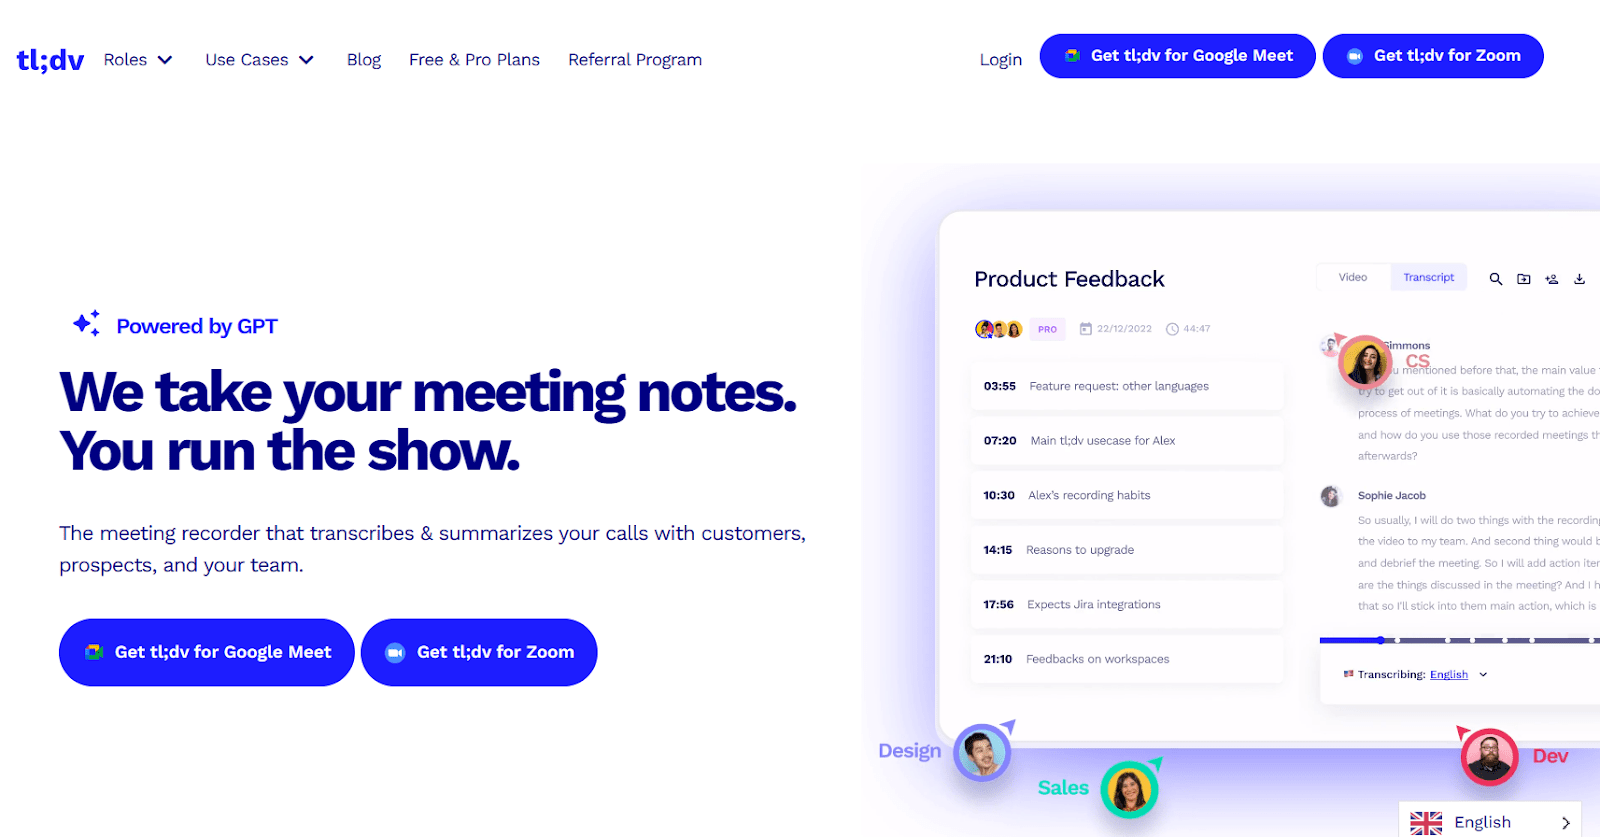 tl;dv website: AI-powered meeting recorder for zoom and google meet